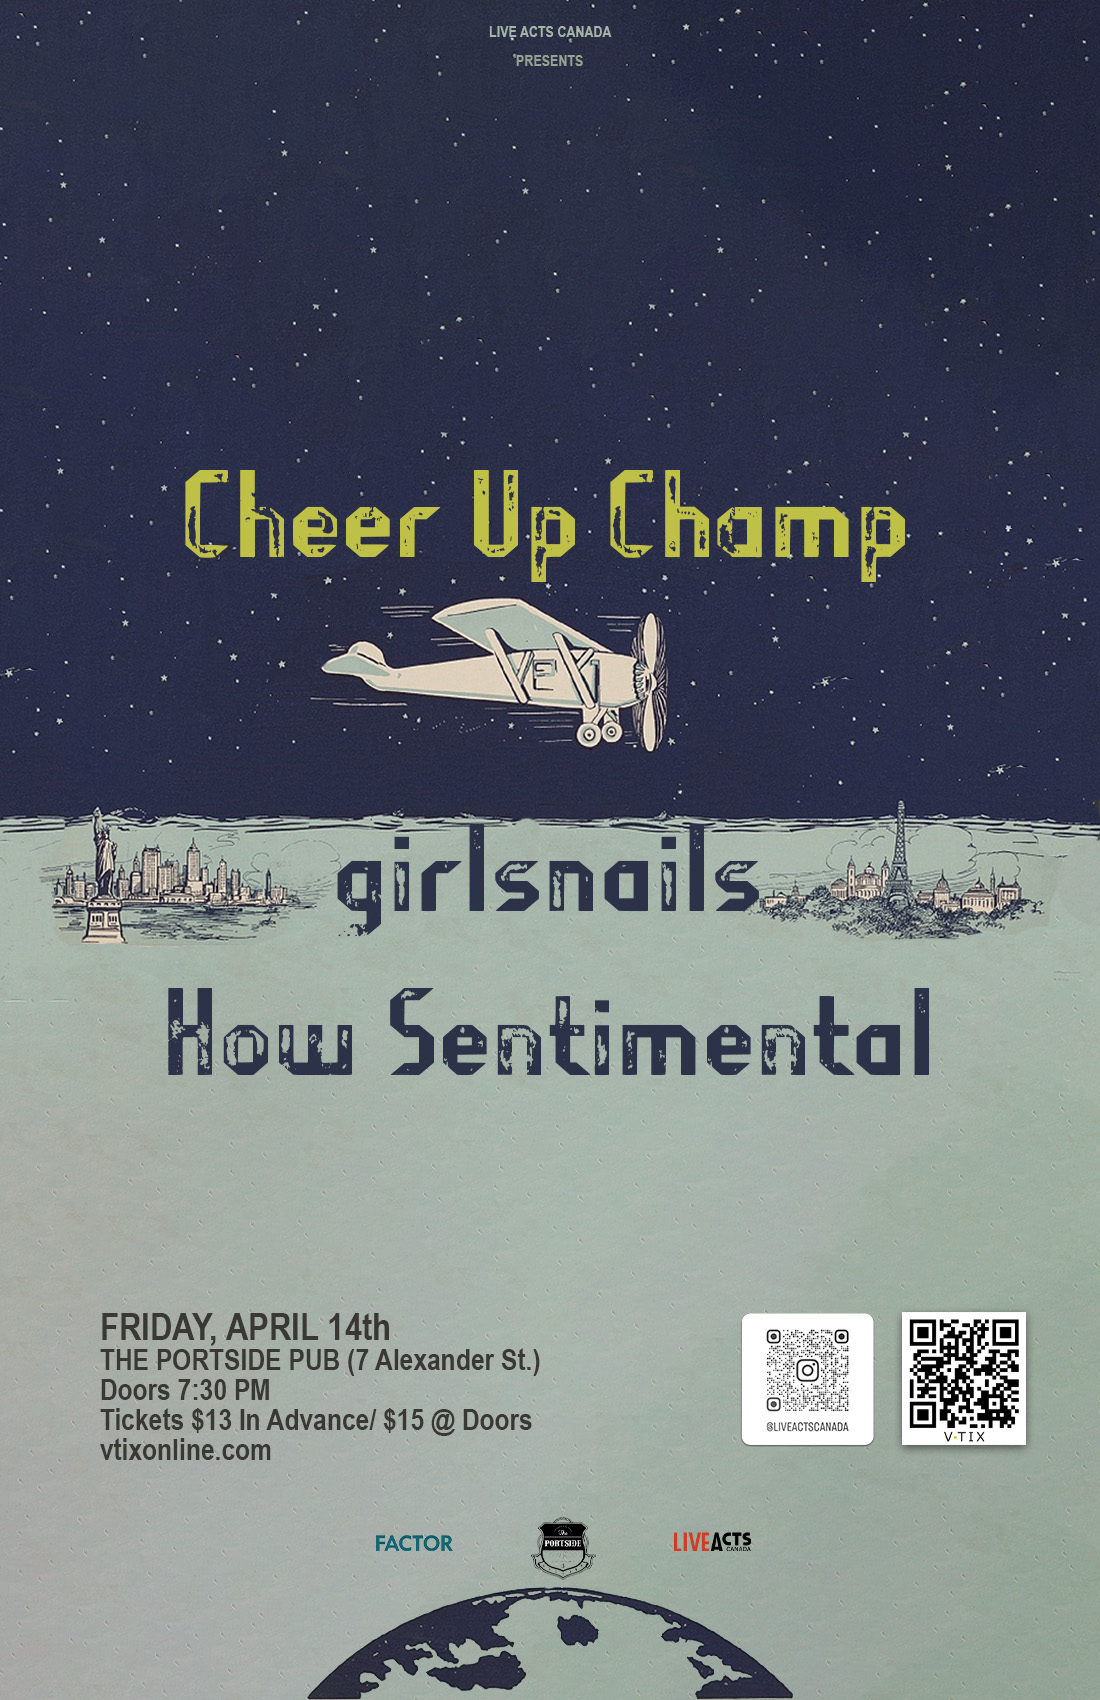 Cheer Up Champ with Special Guests girlsnails and How Sentimental